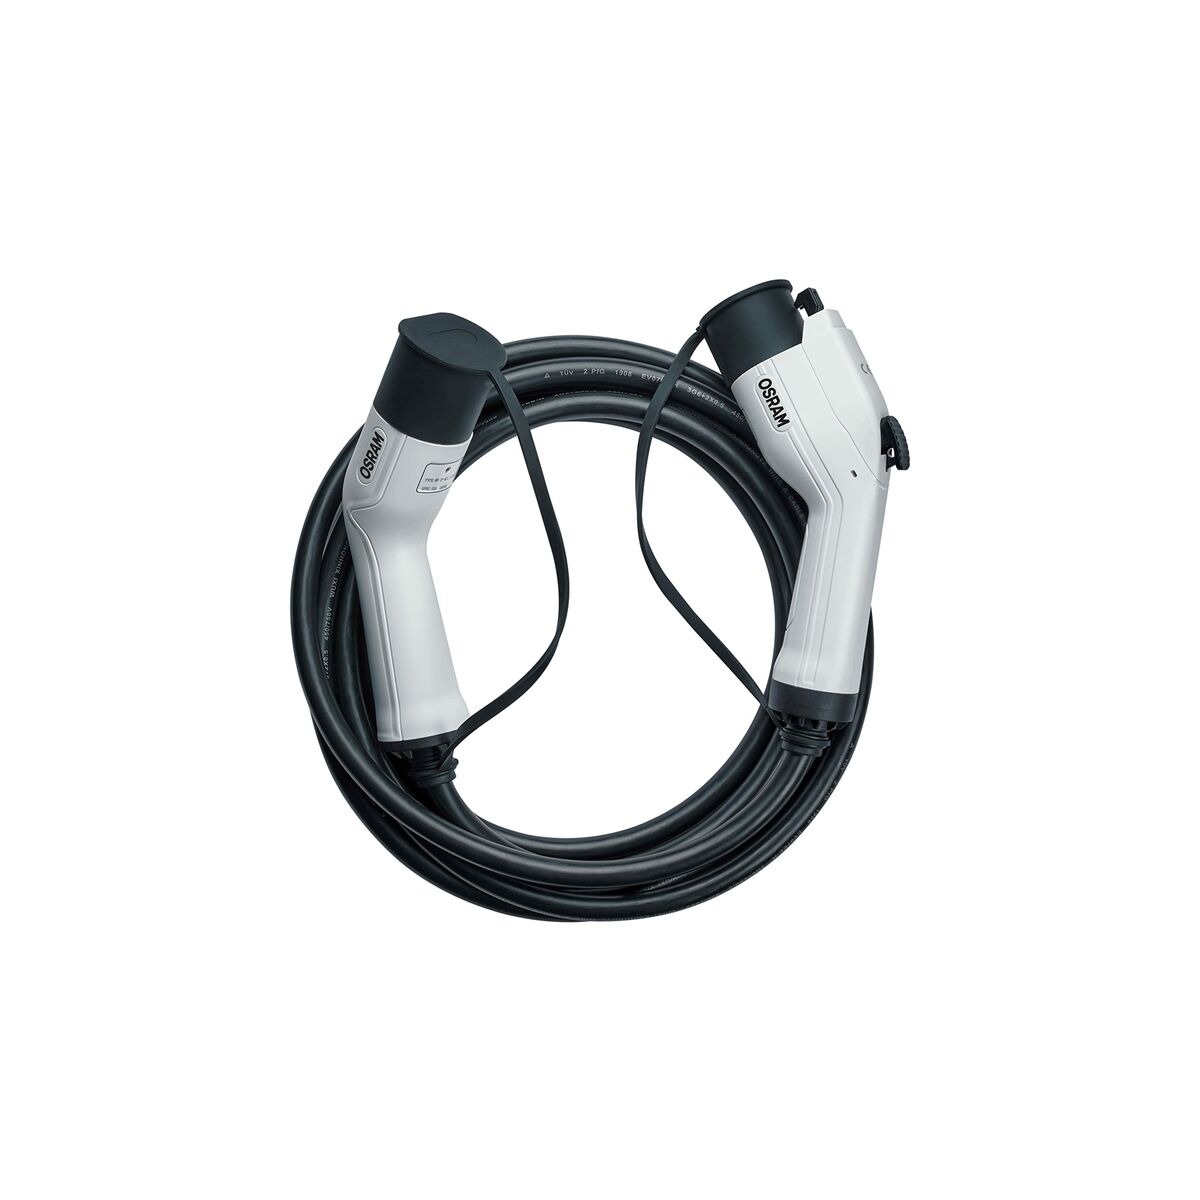 Charging cable for Electric Car Osram OSOCC13205 5700 W 32 A Phase 1